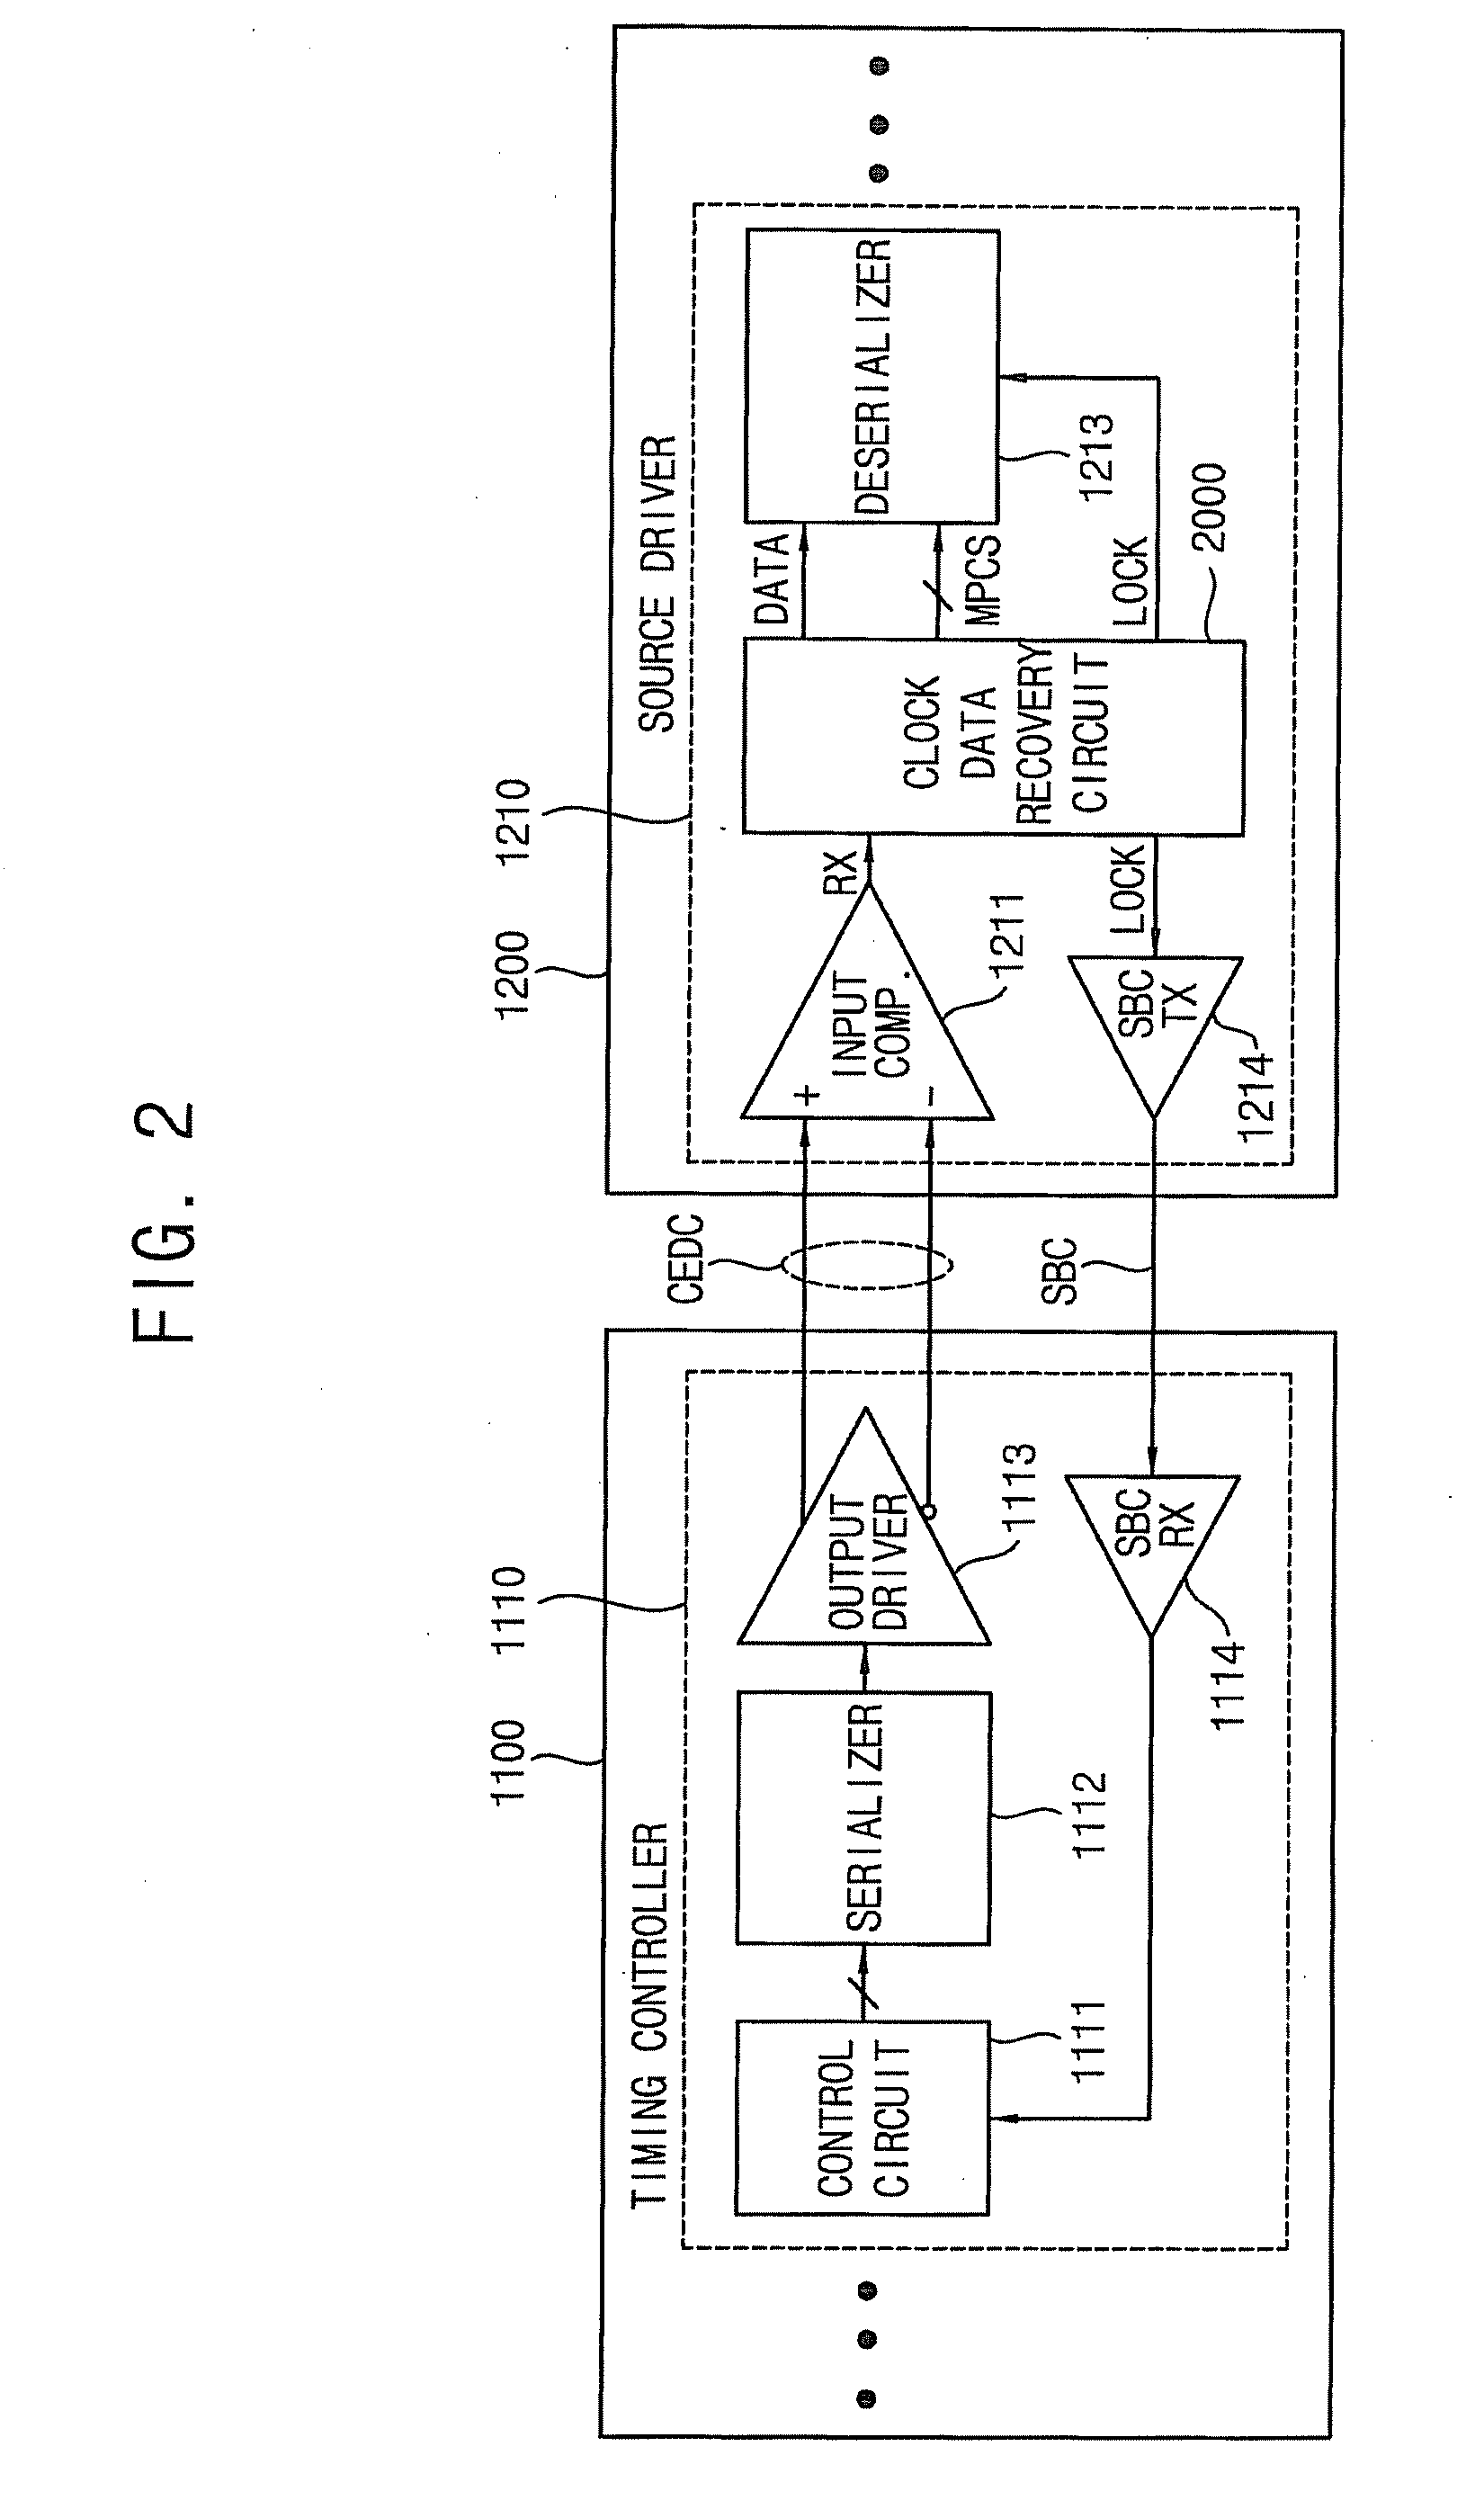 Clock and data recovery circuit of a source driver and a display device